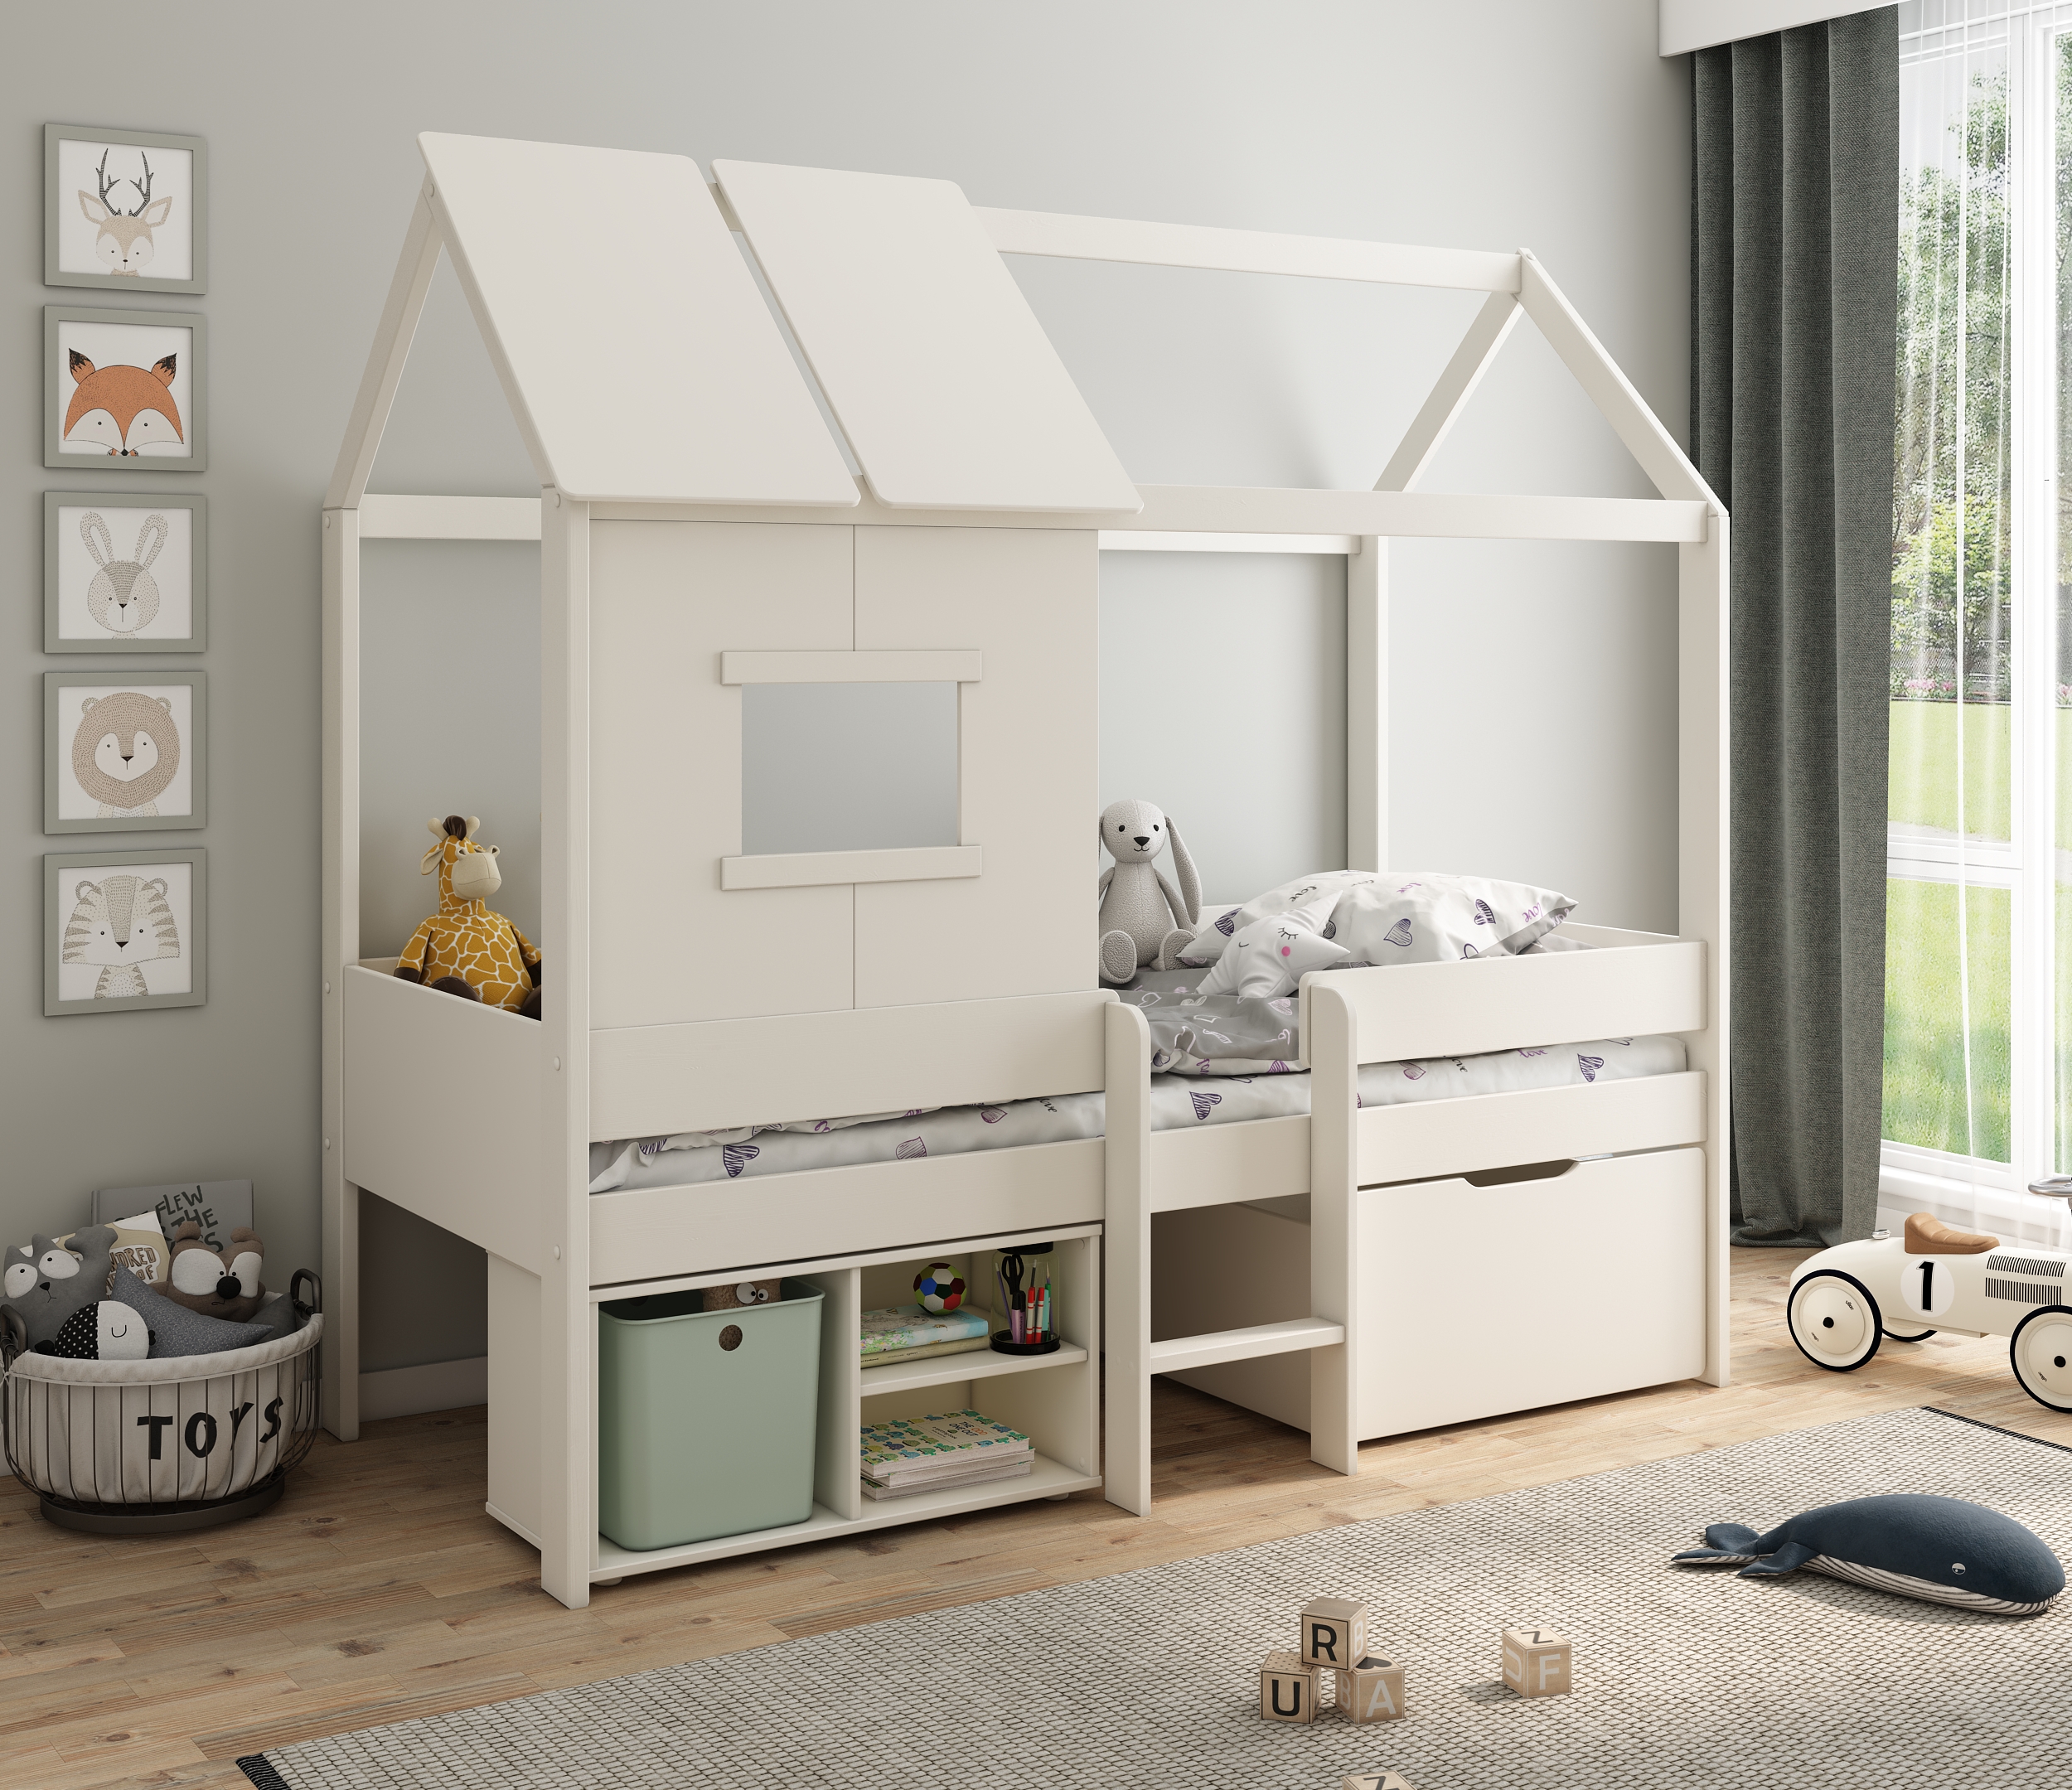 Ordi Mini Playhouse Bed with Storage - Kids Beds